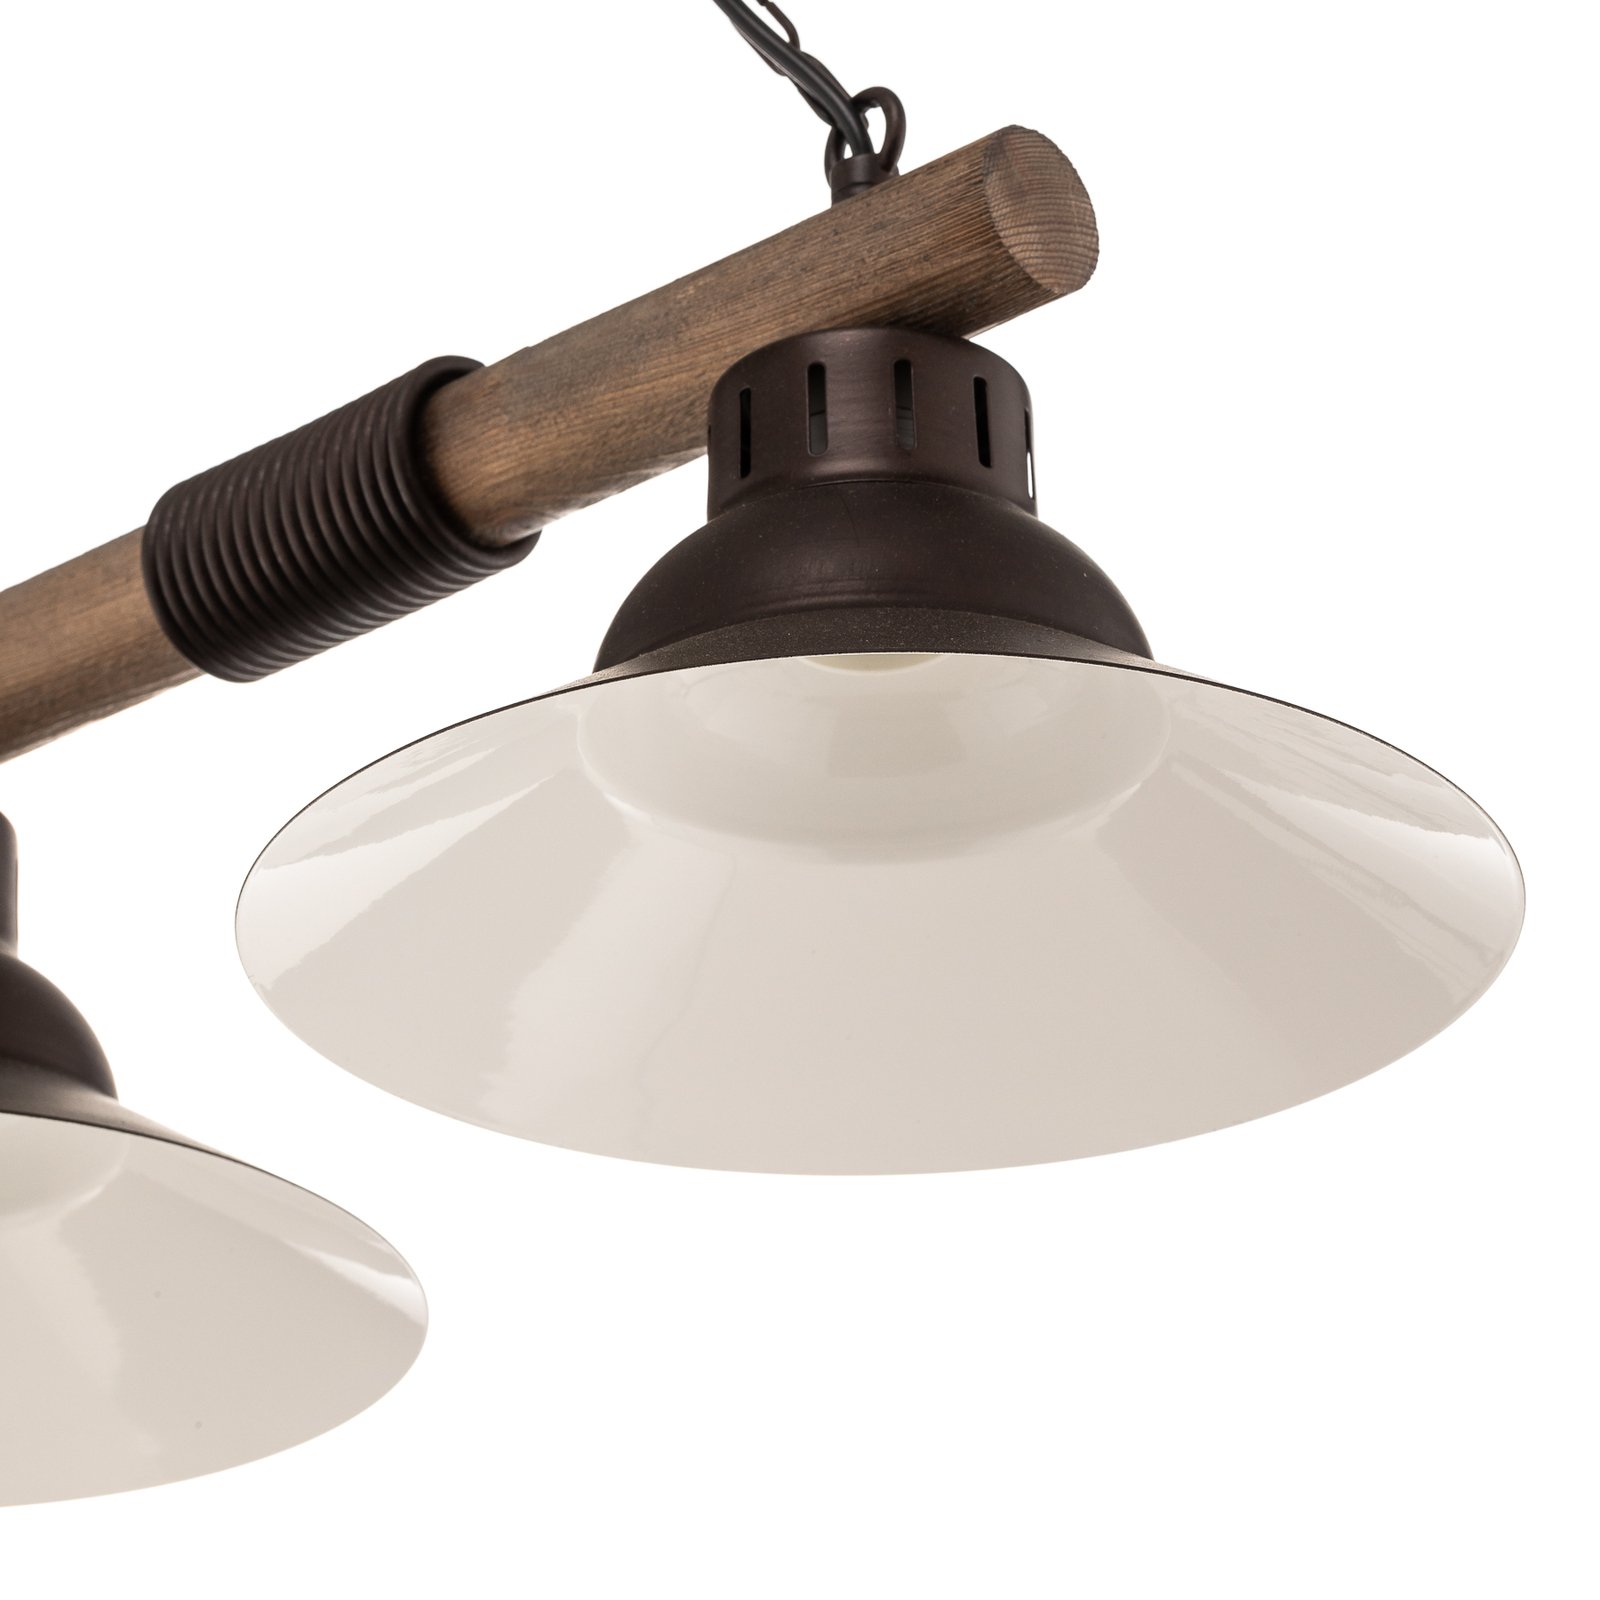 West pendant light with copper shades, 3-bulb